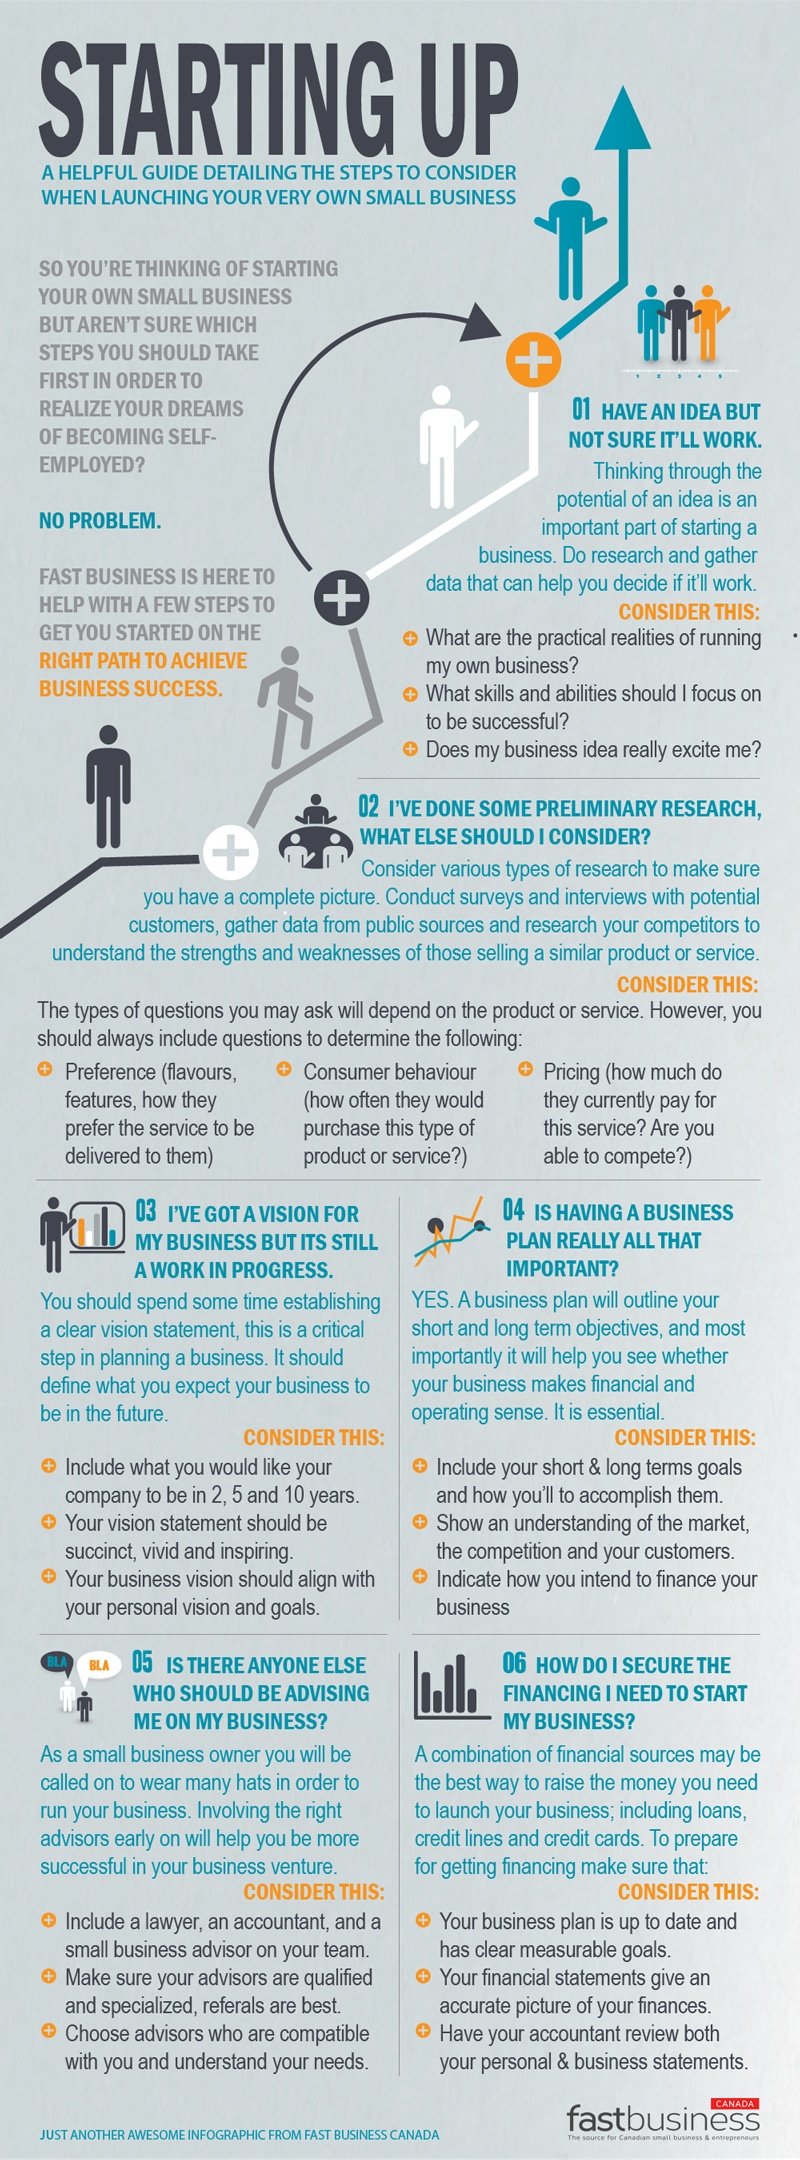 Starting Up: Quick Guide To Starting A Small Business [Infographic]